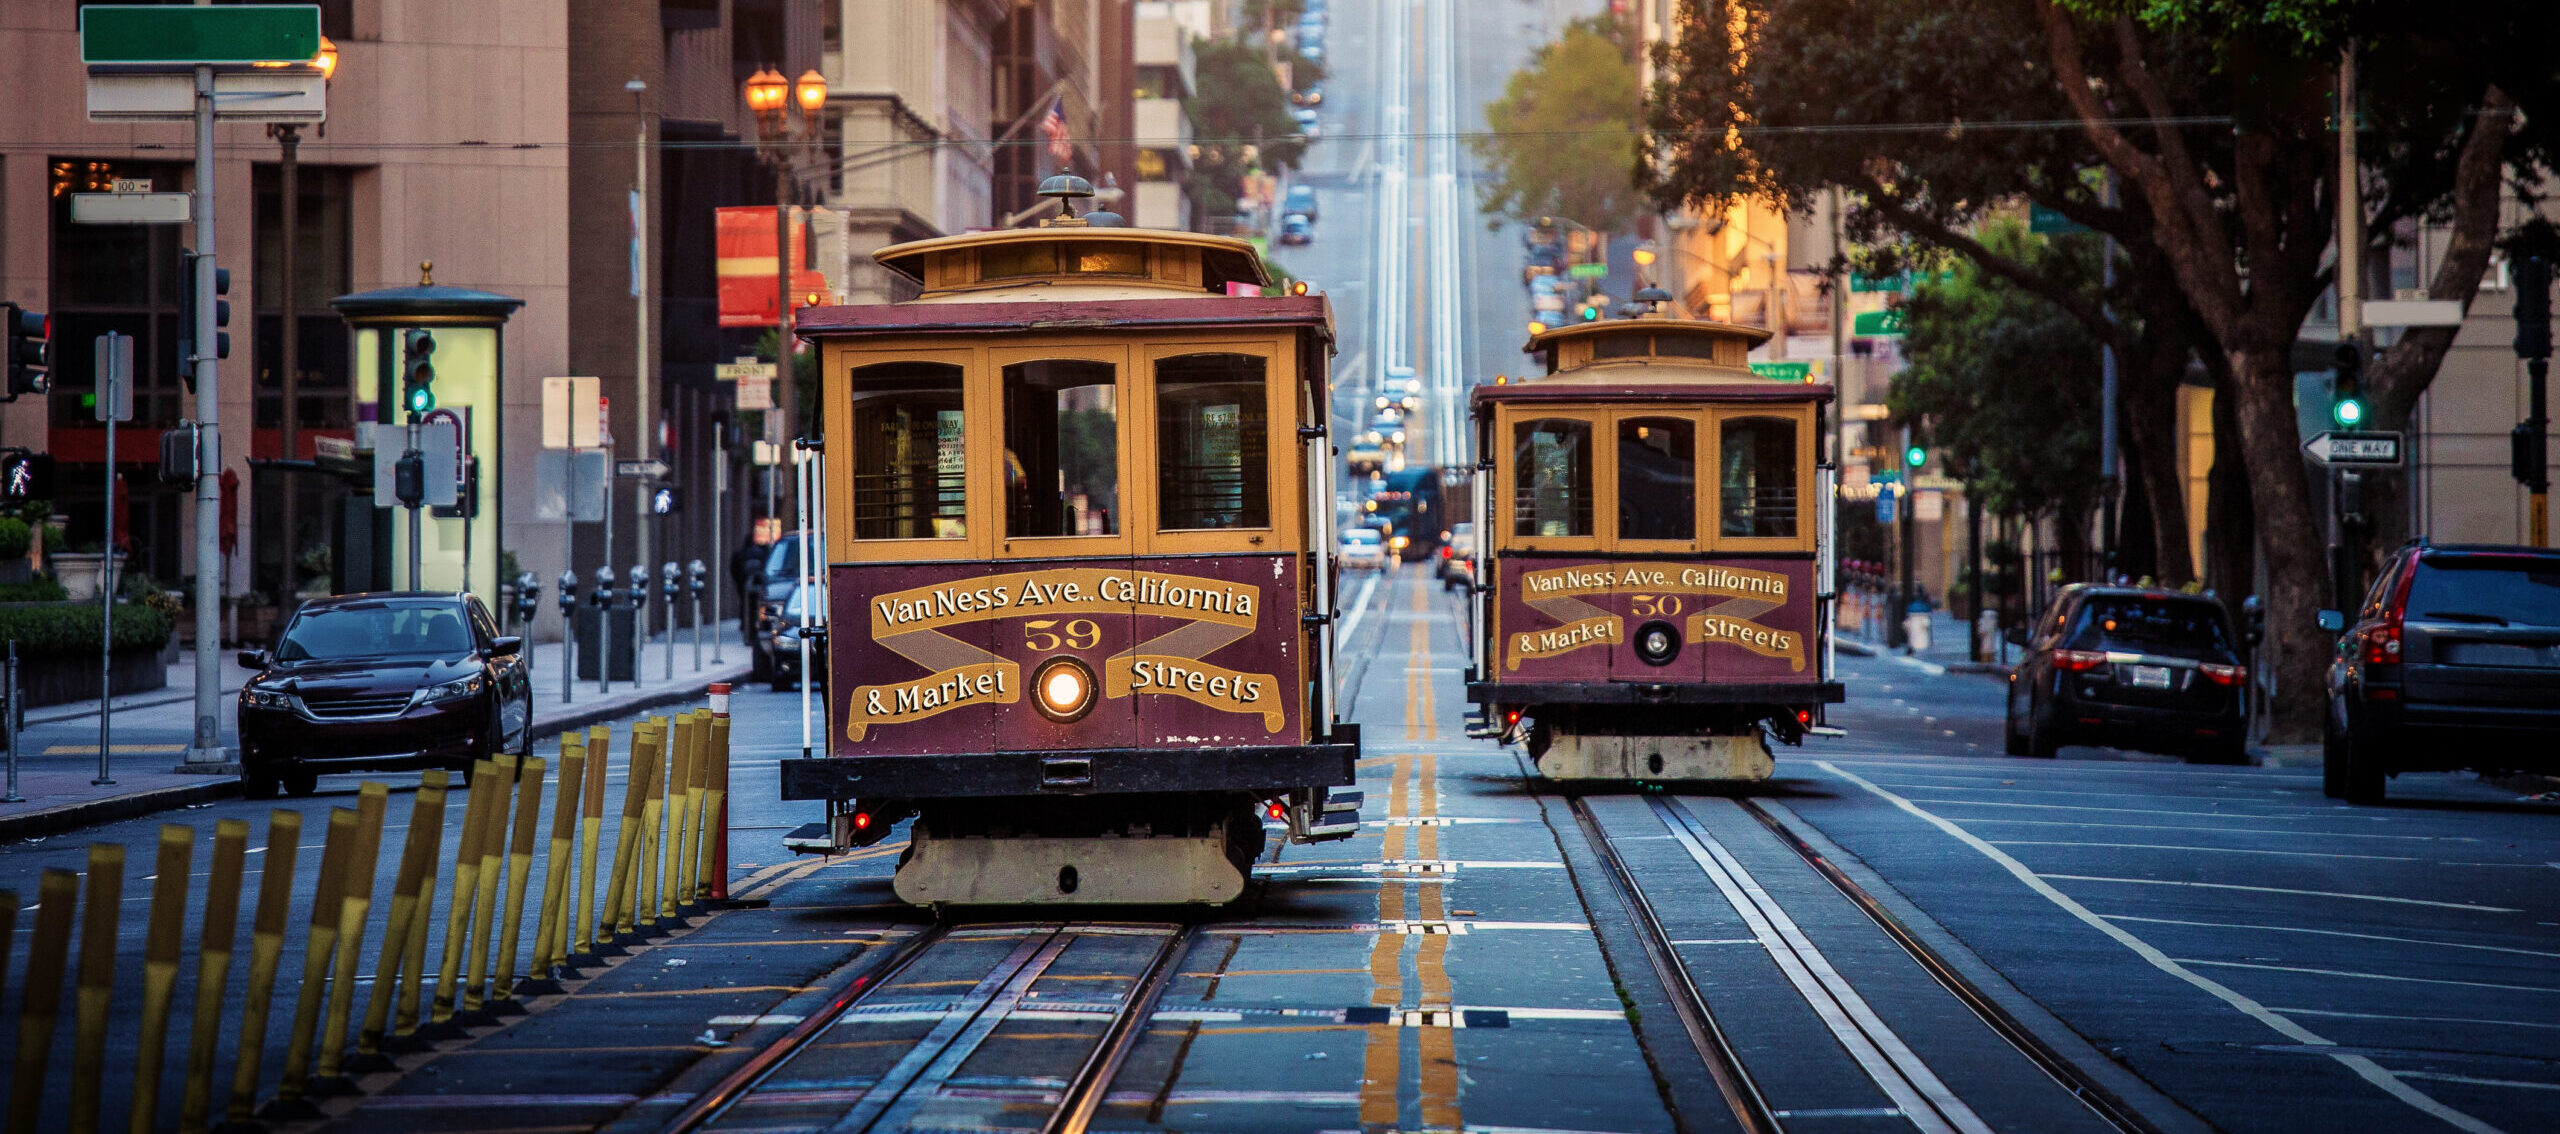 Old-fashioned San Francisco street cars ride around Mission District at sunrise